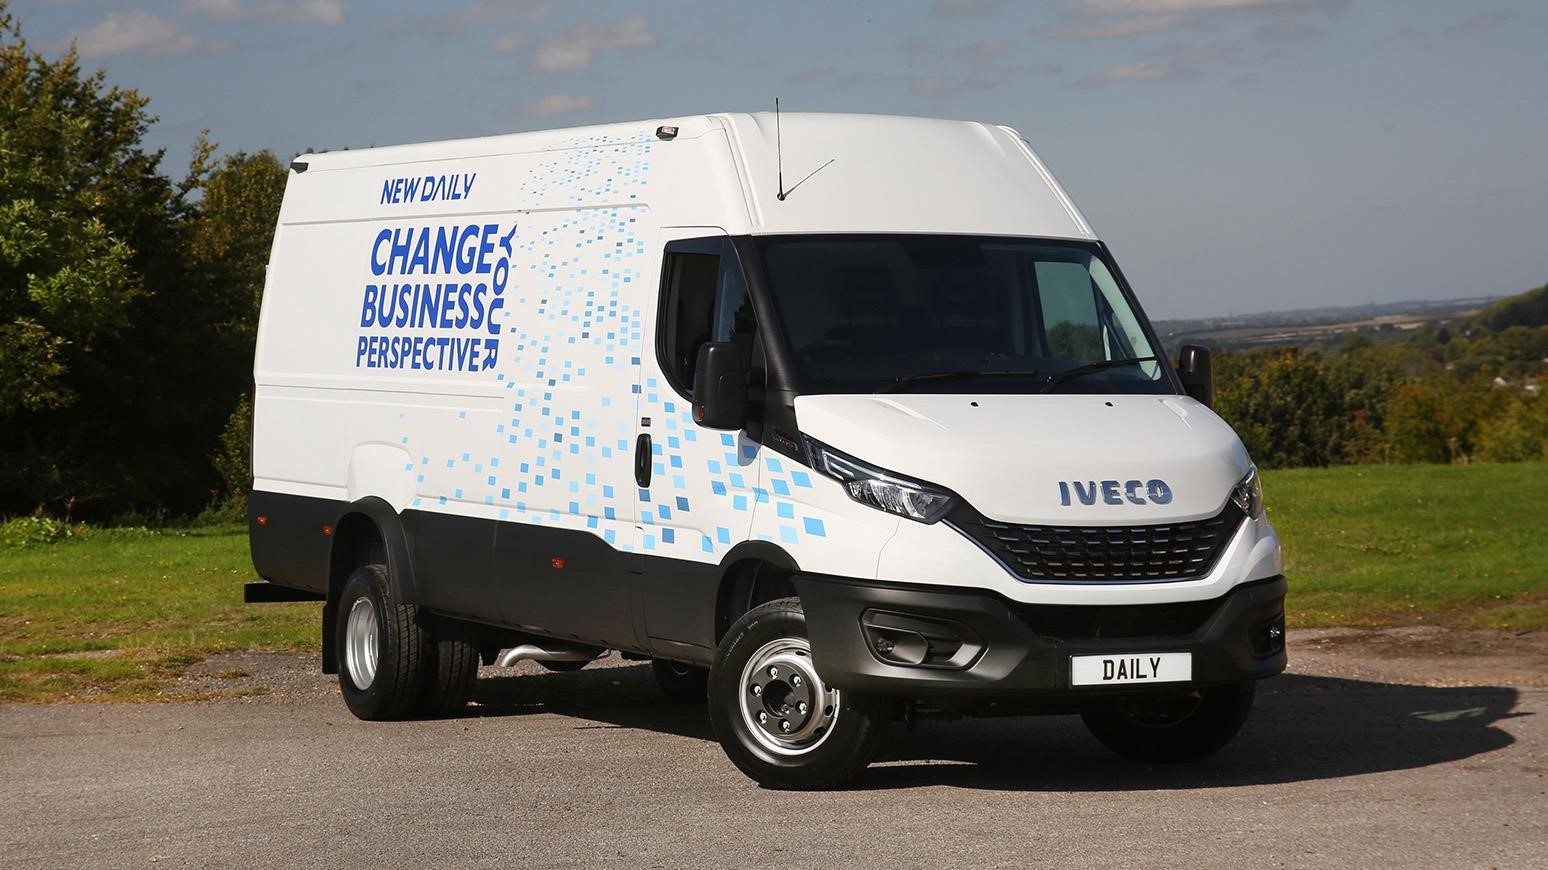 IVECO Daily Wins 2021 Light Truck Of The Year Award, Its Second Win In 3 Years